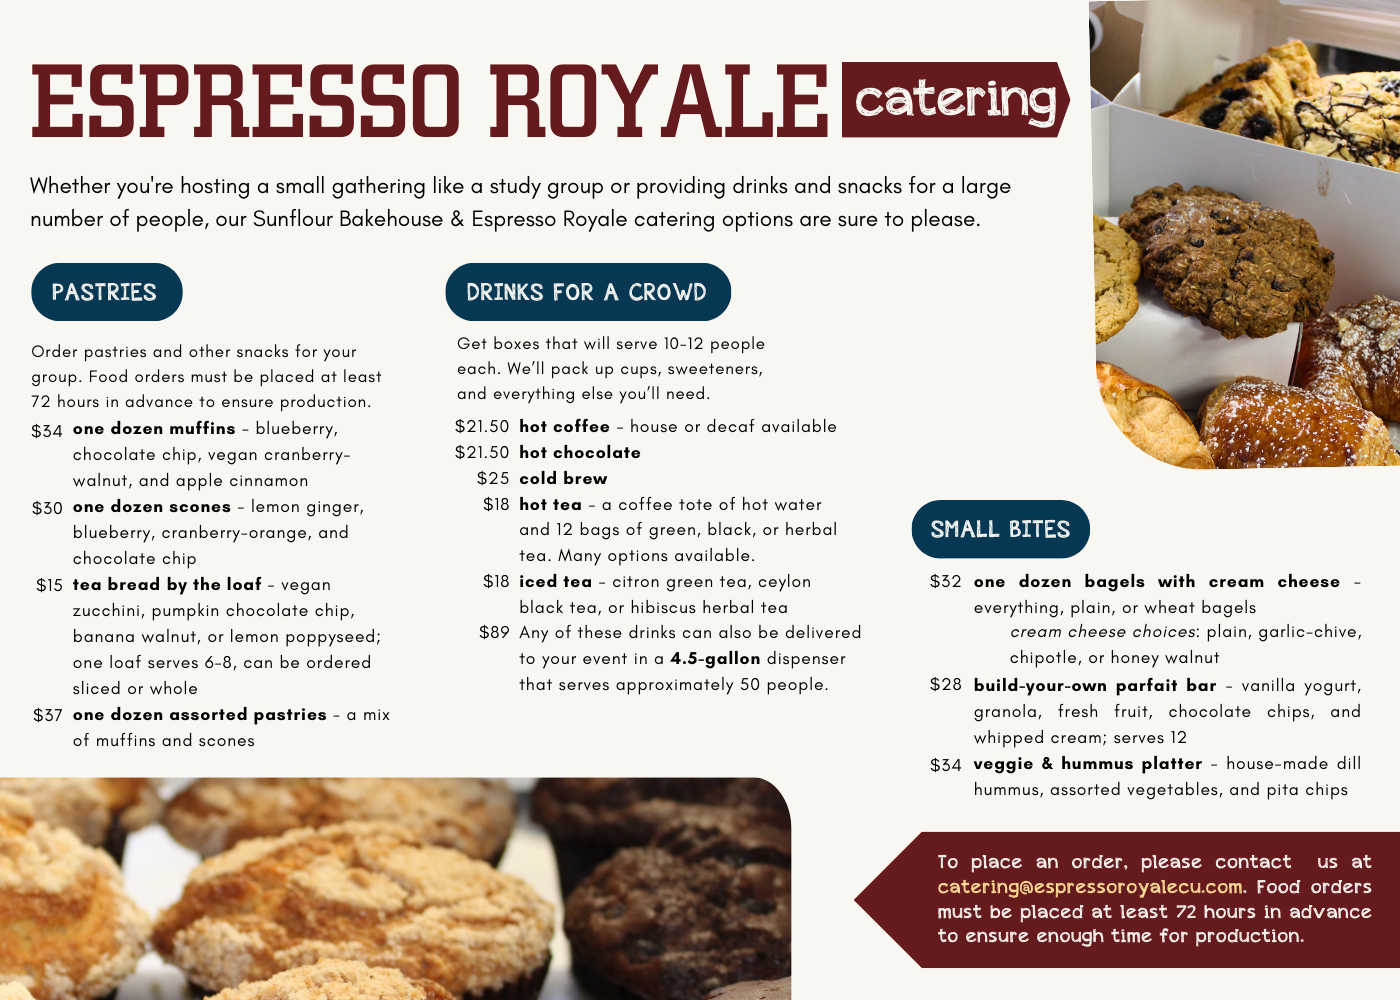 Espresso Royale catering menu, showing pastry, bulk beverage, and snack plate prices